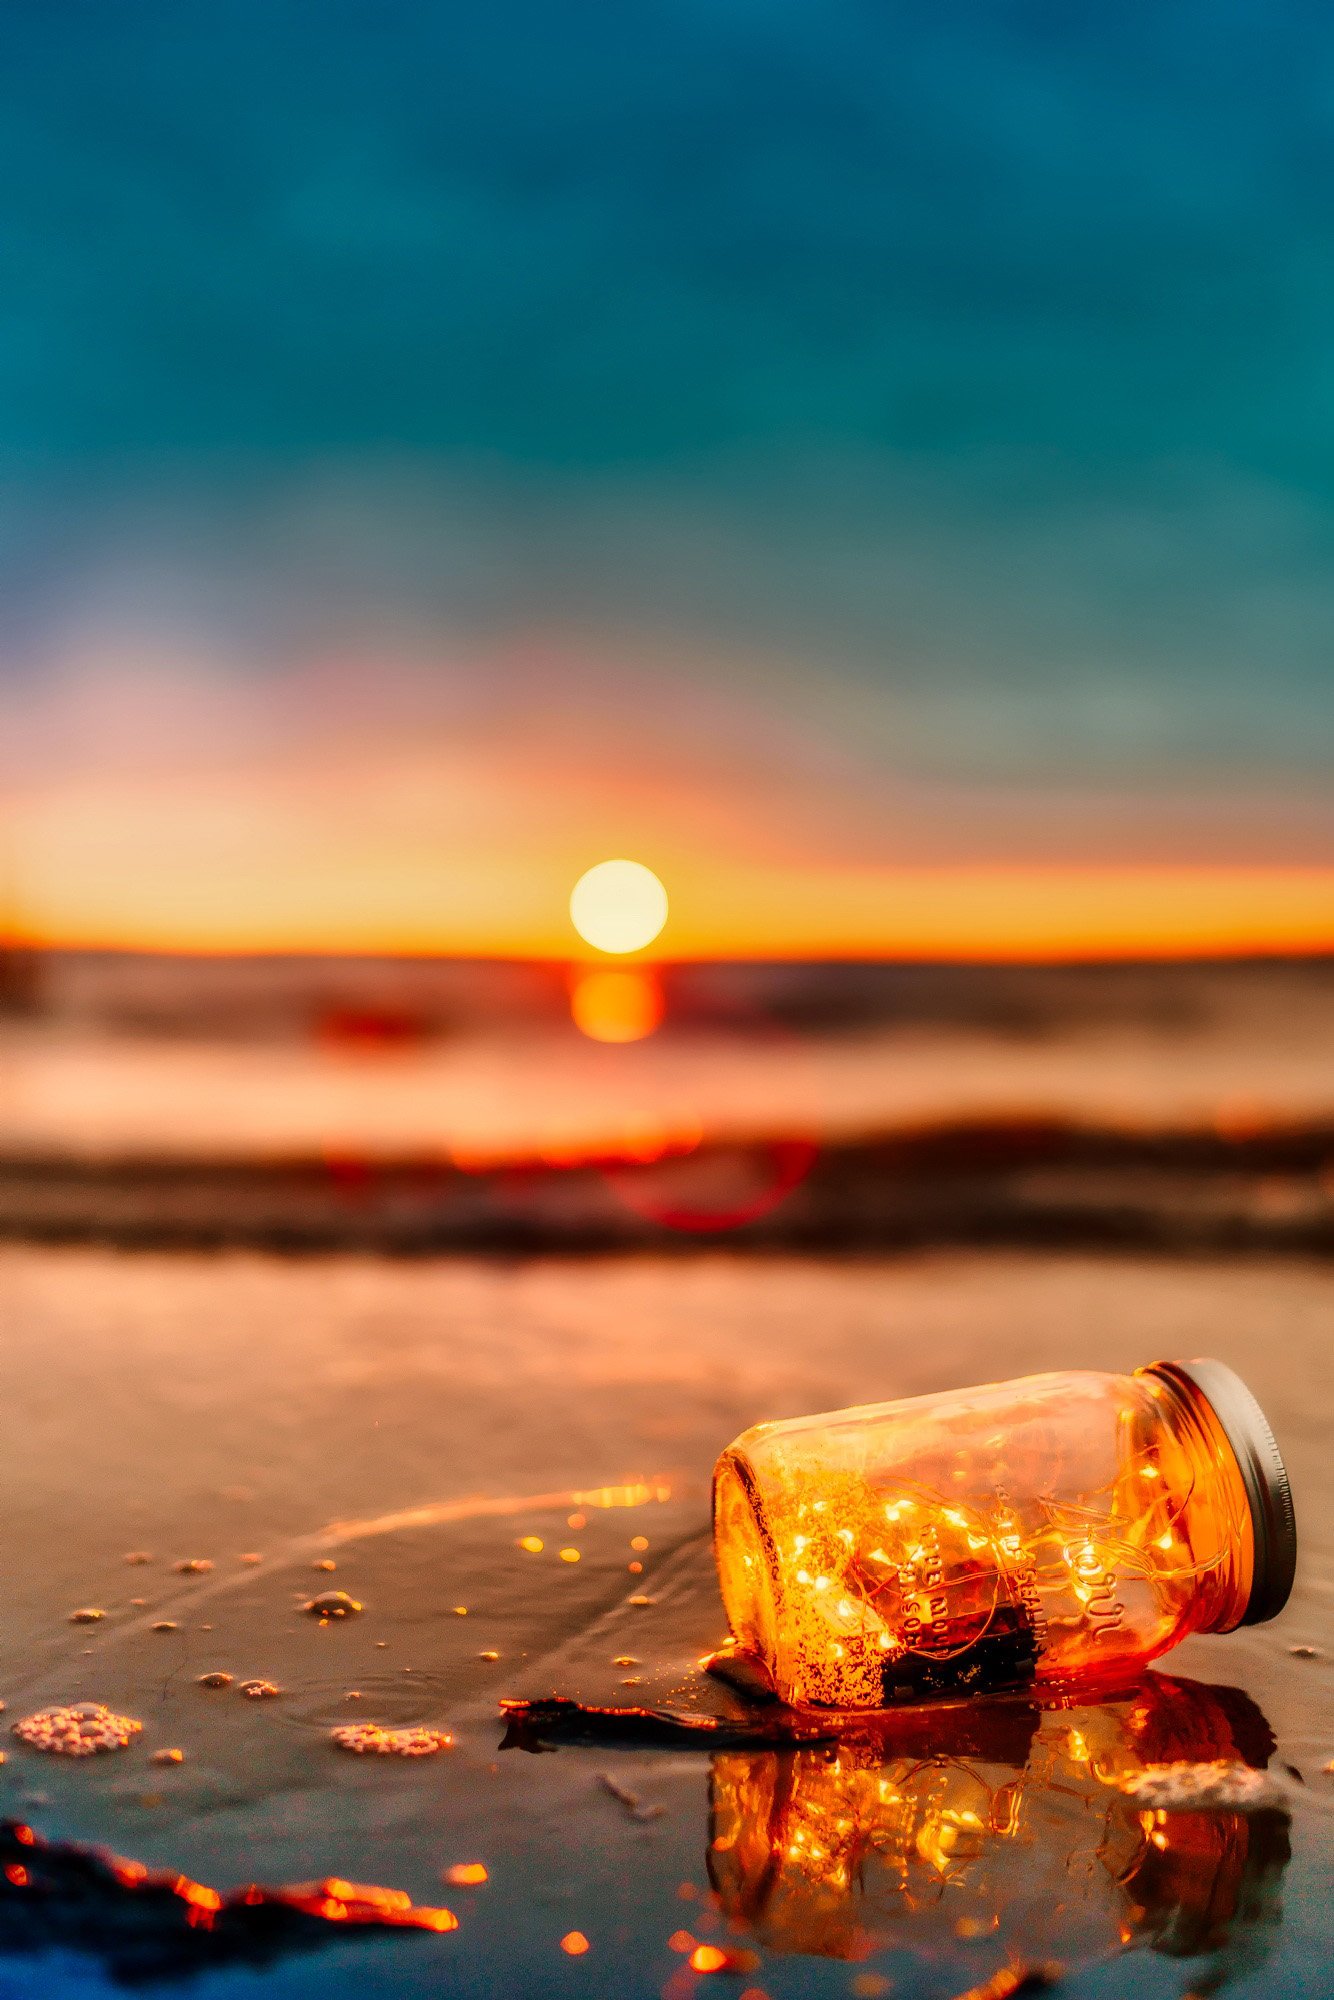 Perfume Bottle On The Beach At Sunset. 3d Rendering Free Image and  Photograph 210342904.